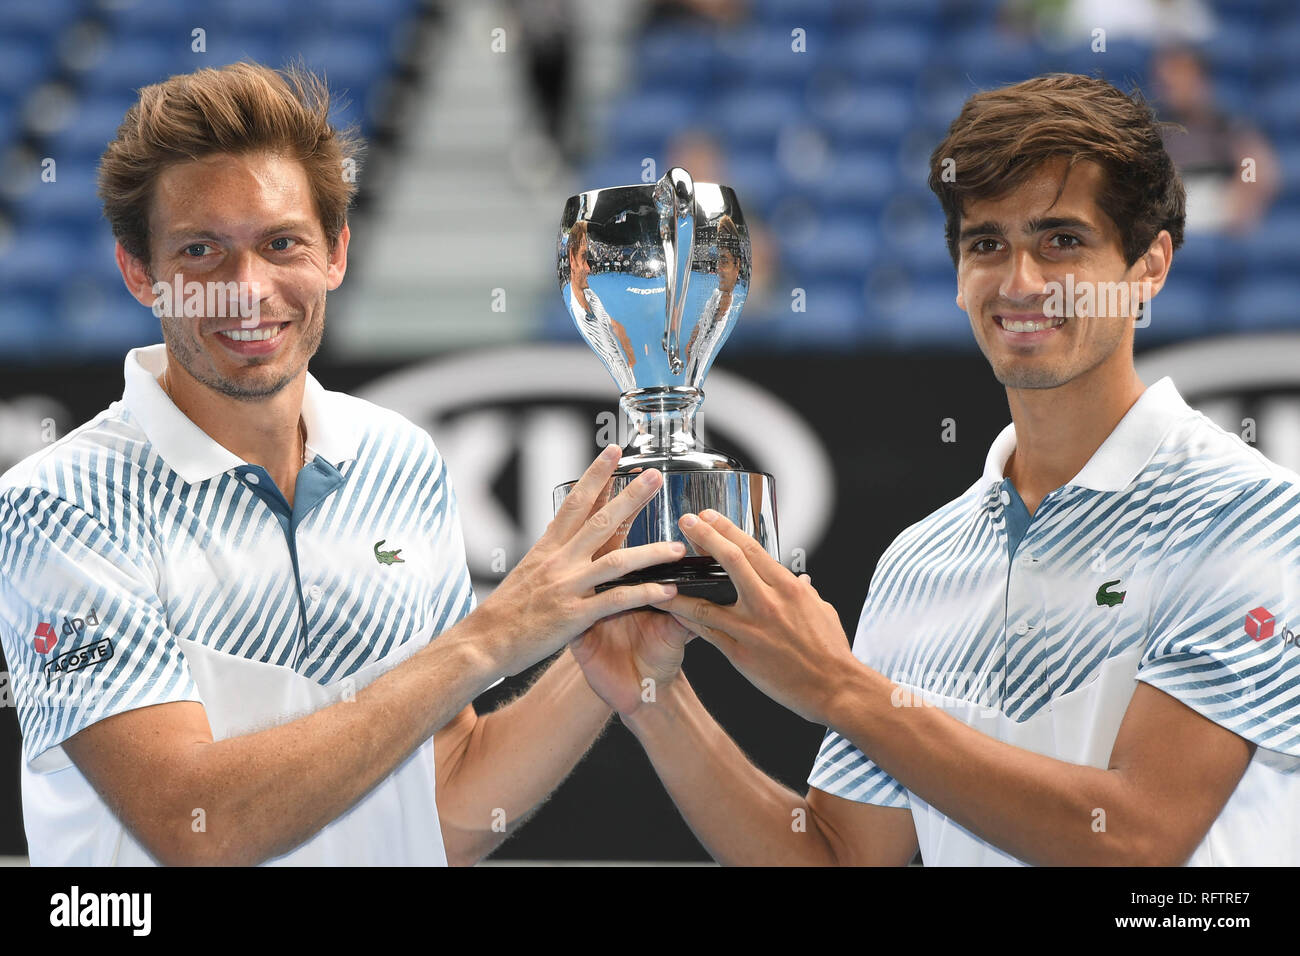 for mig Støt give Melbourne, Australia. 27th Jan, 2019. Pierre-Hugues Herbert(R)/Nicolas  Mahut poses with the trophy during the trophy ceremony for the men's doubles  final match between Pierre-Hugues Herbert/Nicolas Mahut of France and Henri  Kontinen(Finland)/John Peers ...